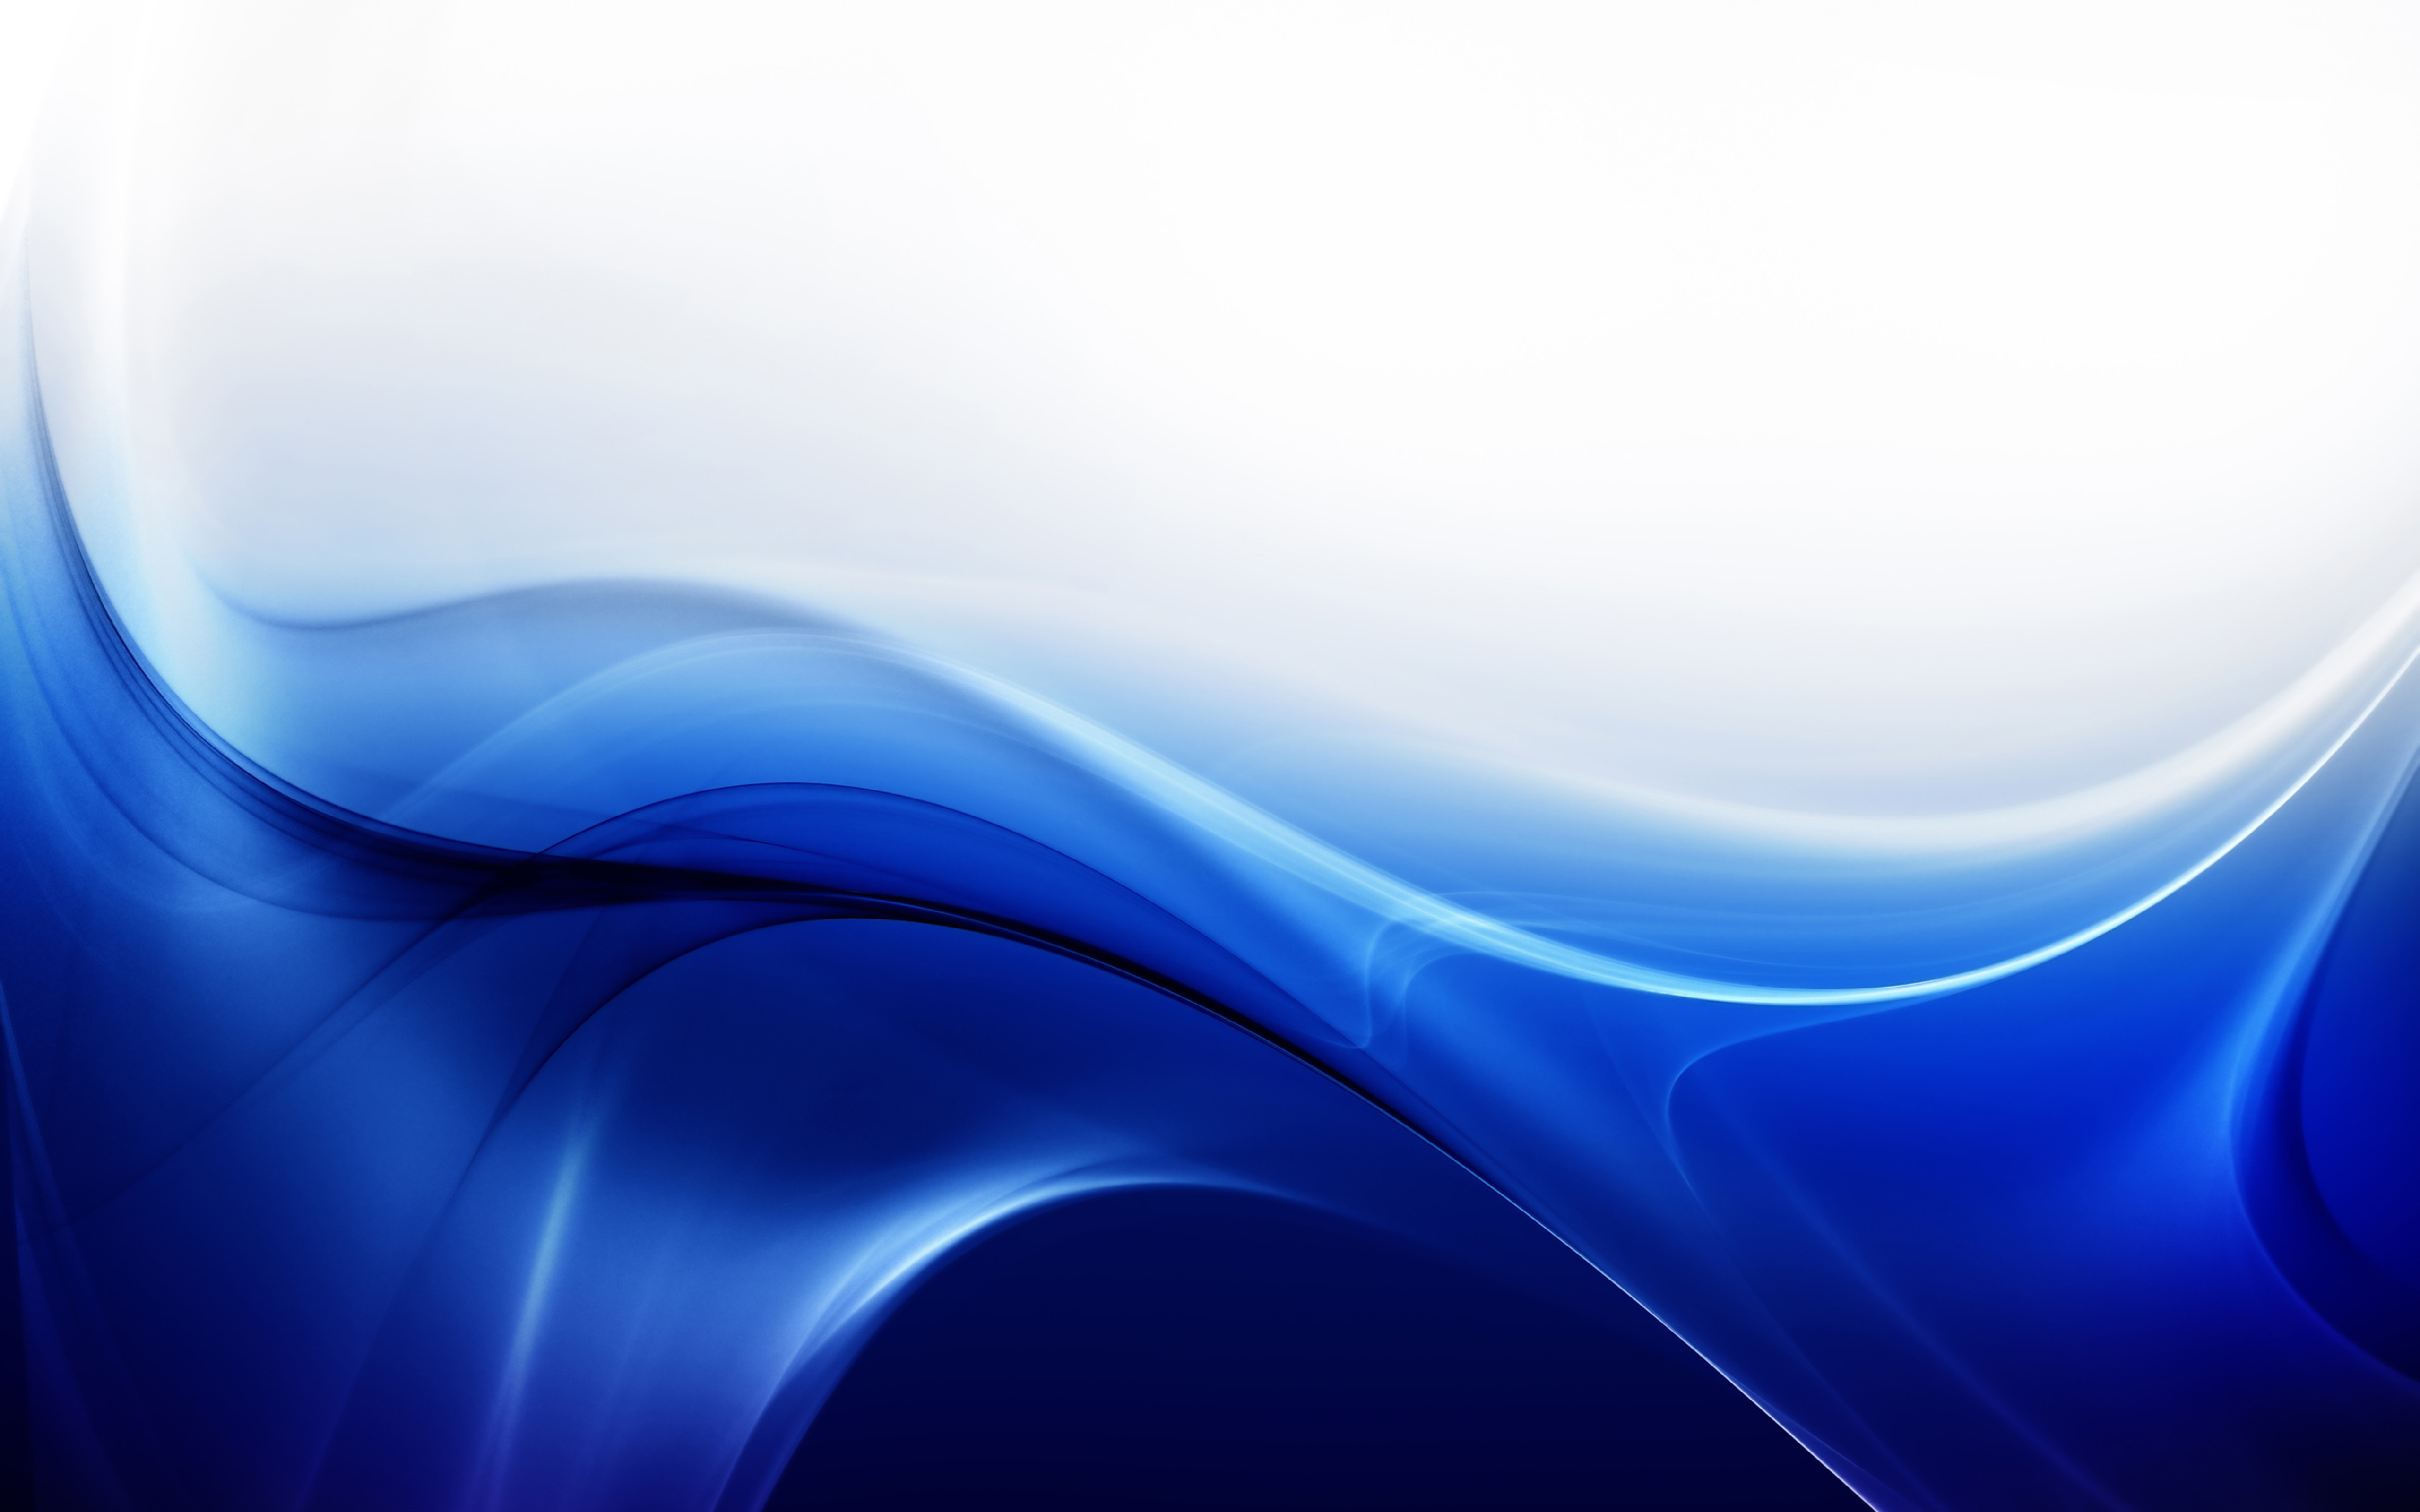 Abstract Royal Blue Background - 5120x3200 Wallpaper 